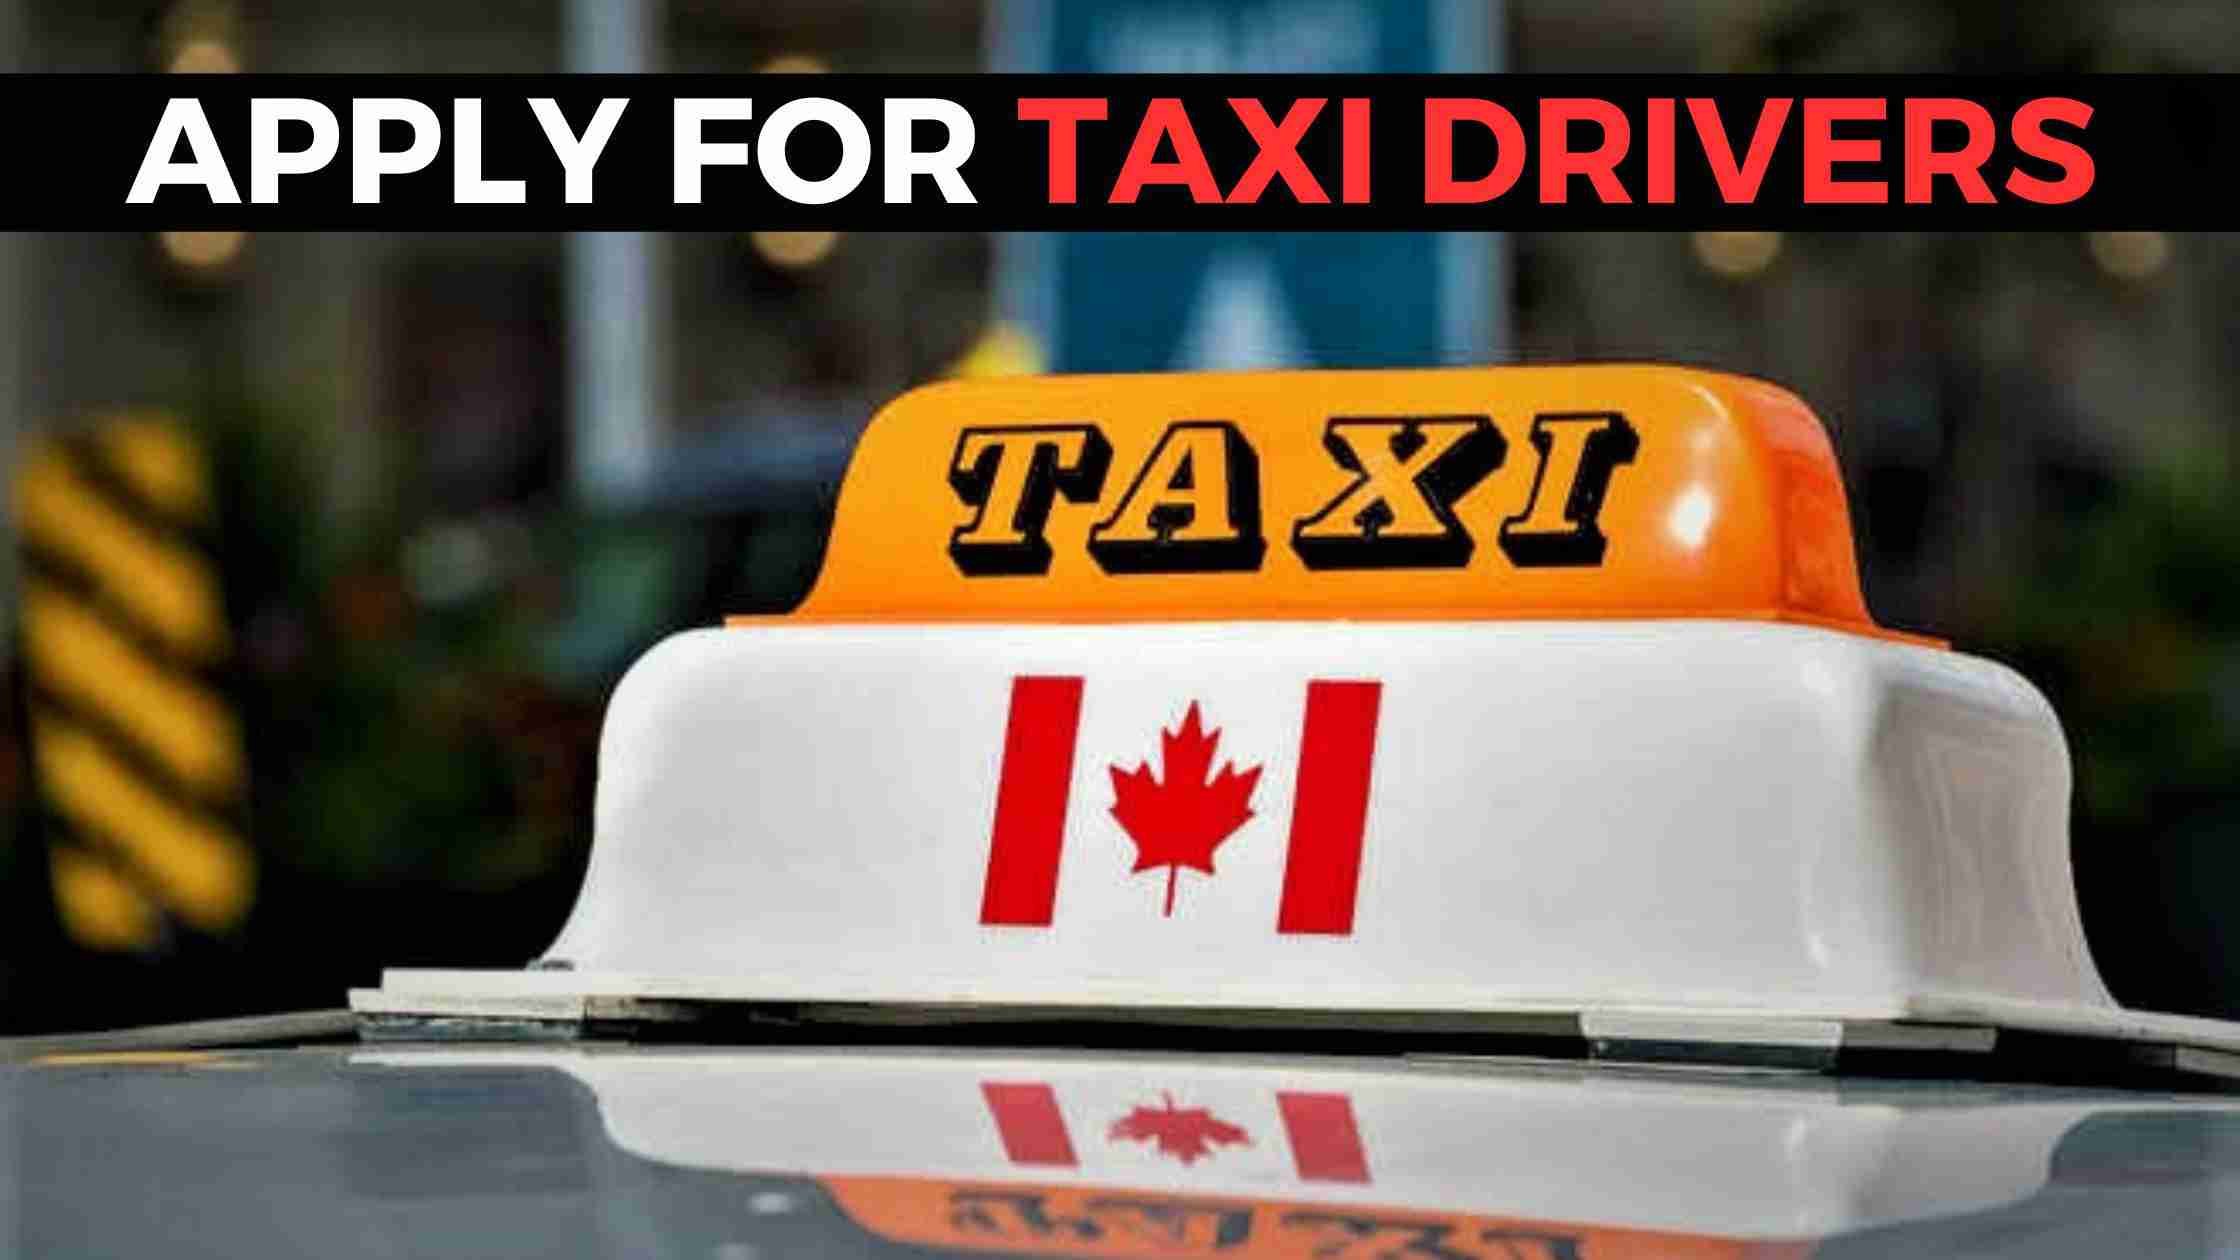 Taxi Driver Jobs in Canada